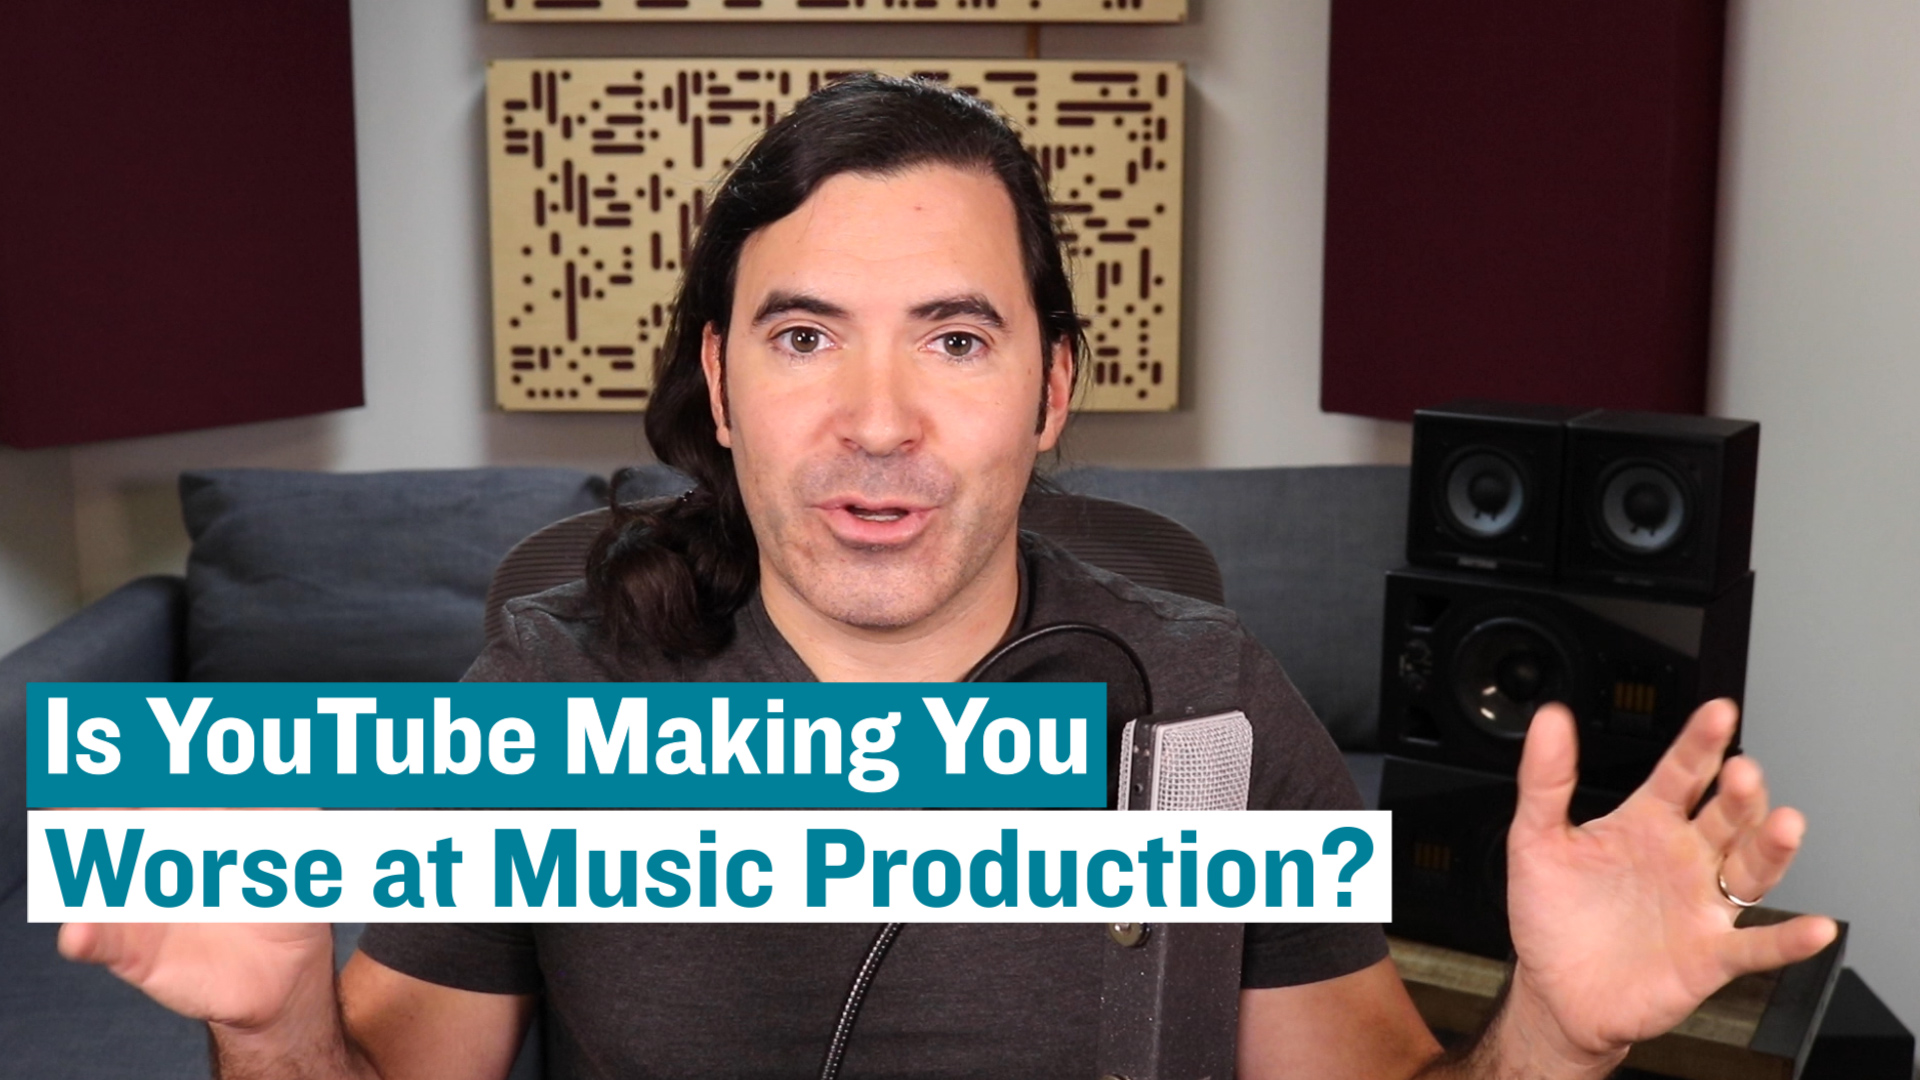 Are Short YouTube Videos Helping or Holding Back Your Audio Skills?